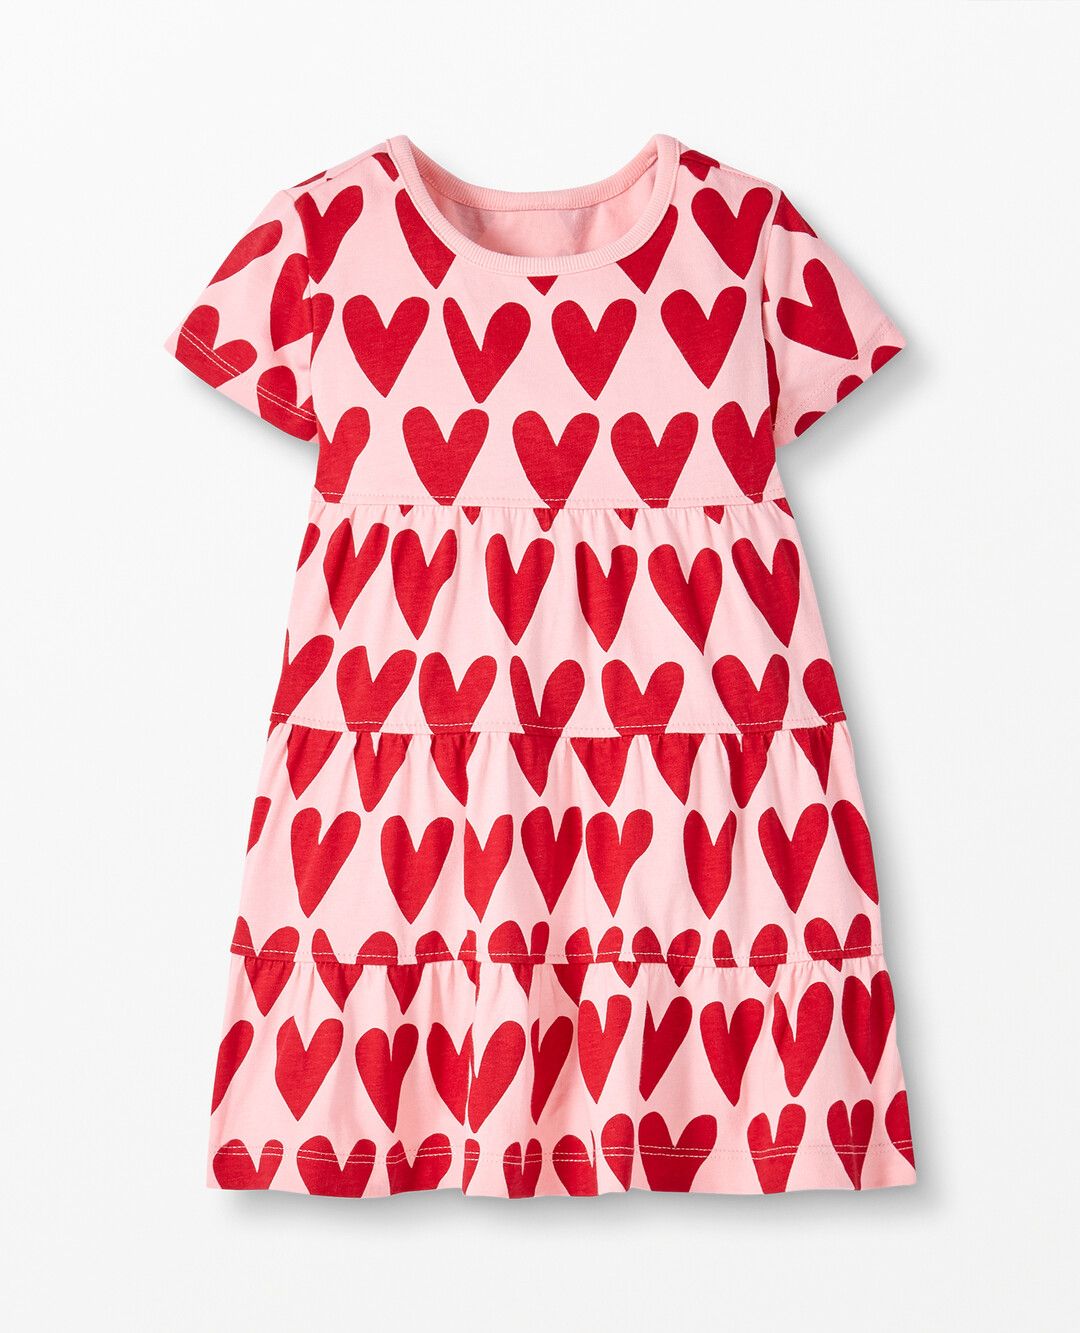 All Hearts Twirl Power Dress | Hanna Andersson